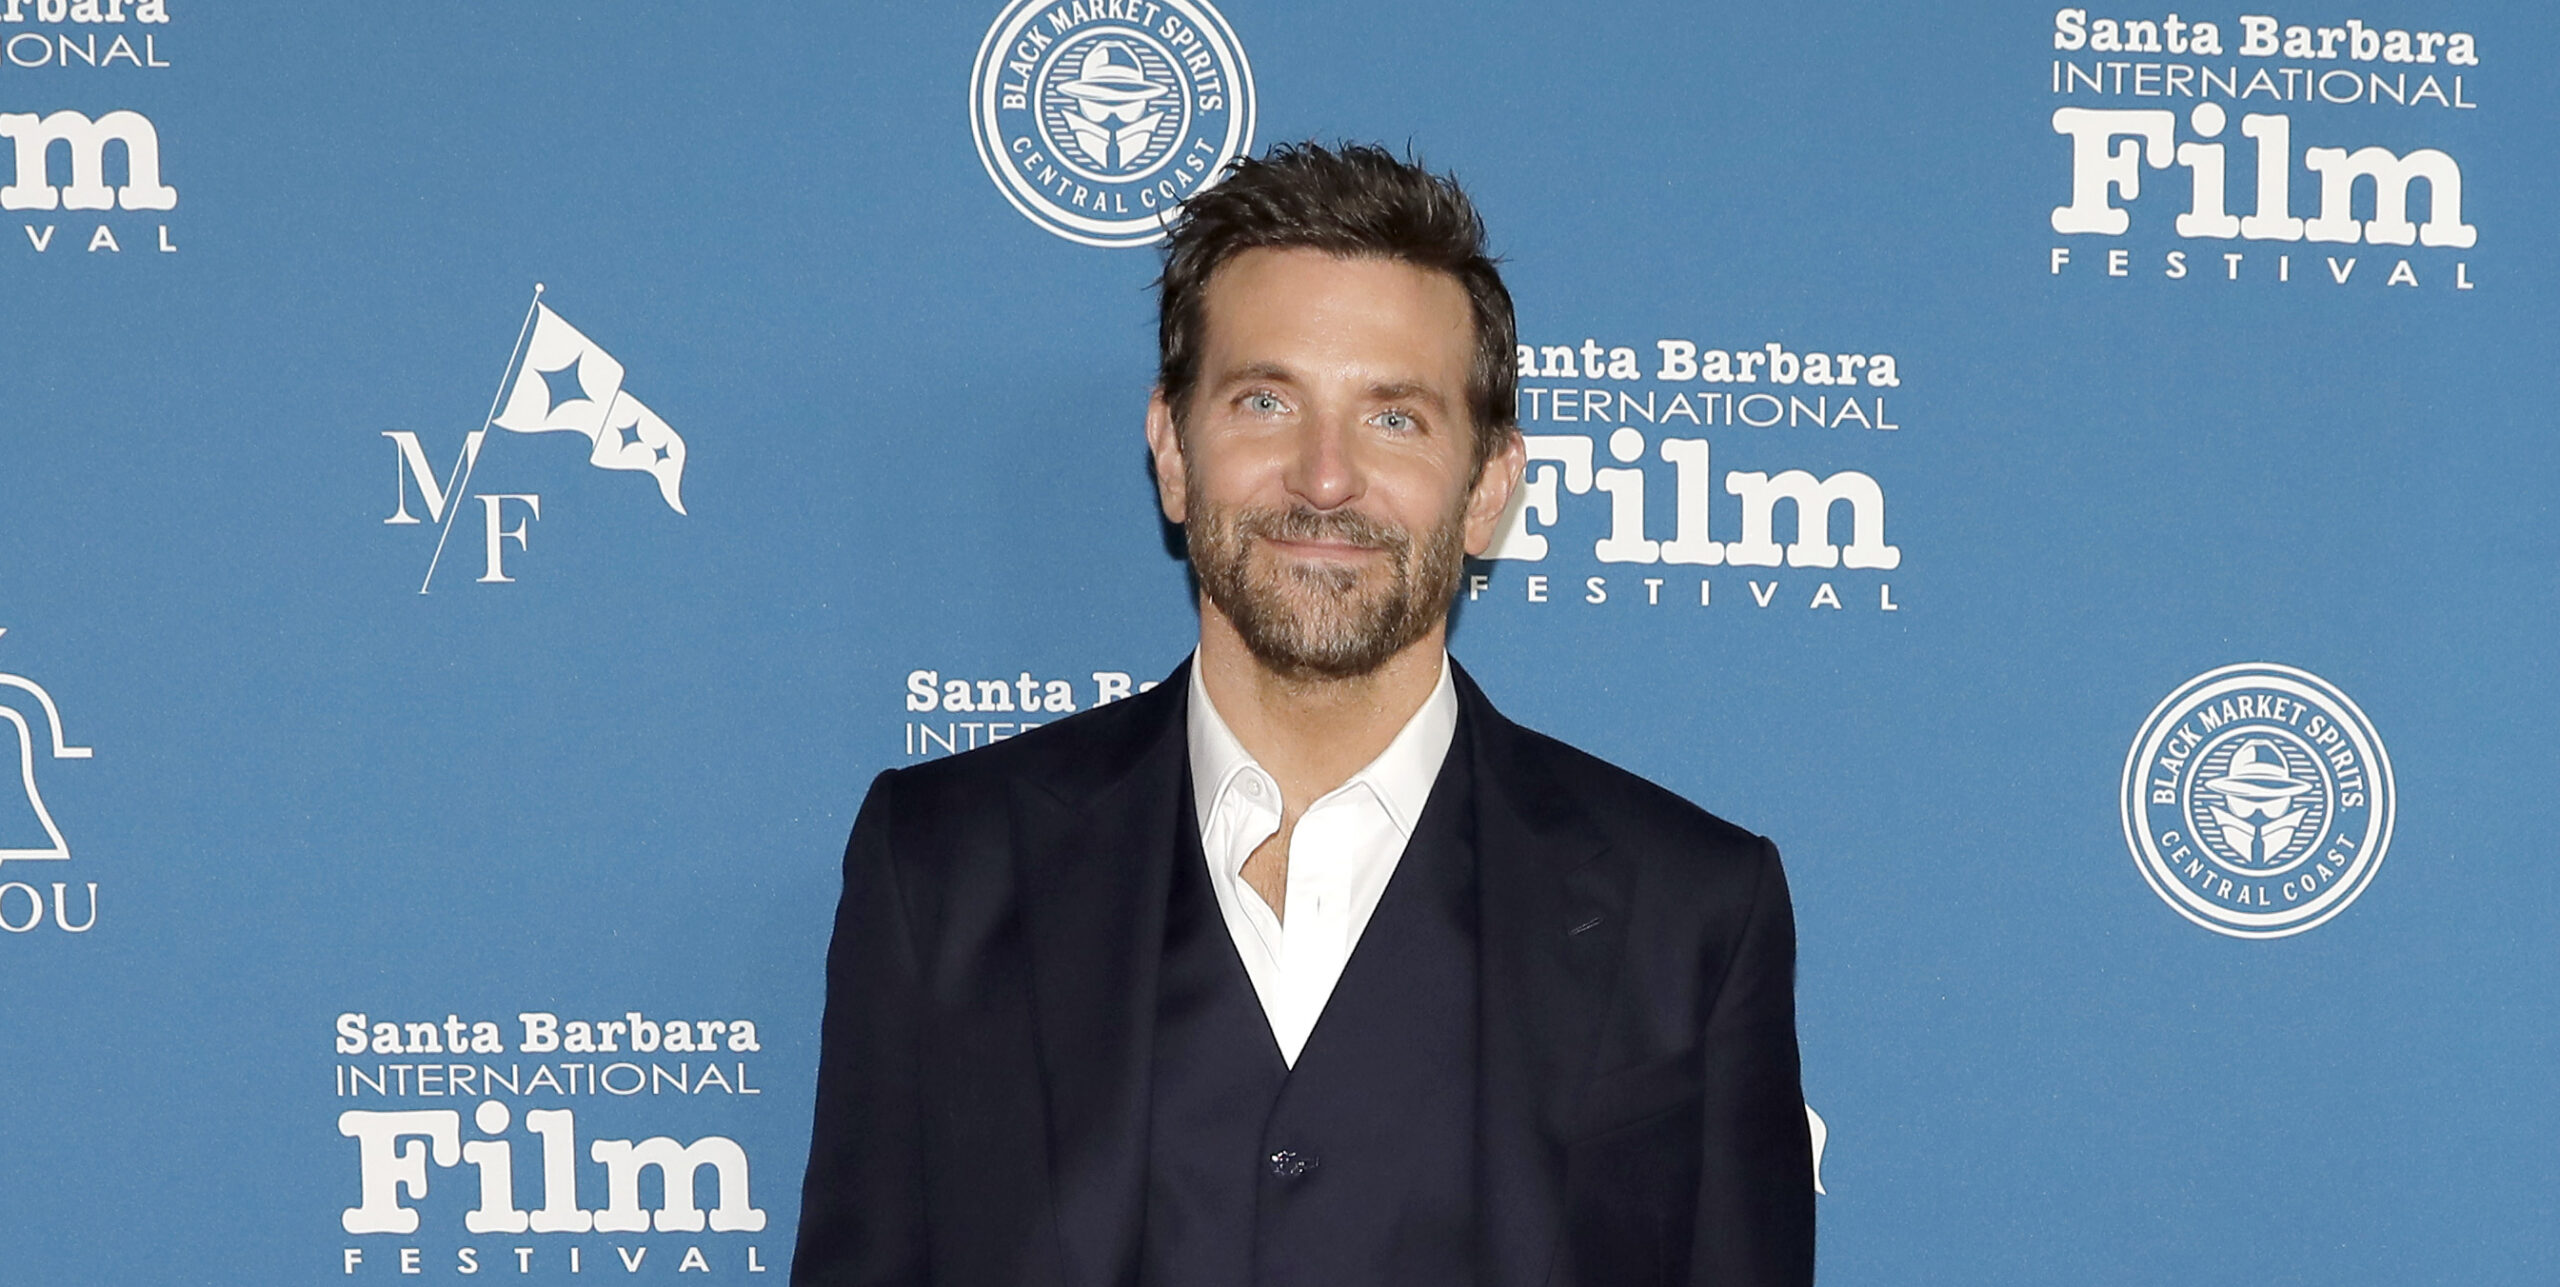 Bradley Cooper in a tailored Louis Vuitton navy suit stands on a red carpet against a backdrop with logos for the Santa Barbara International Film Festival.